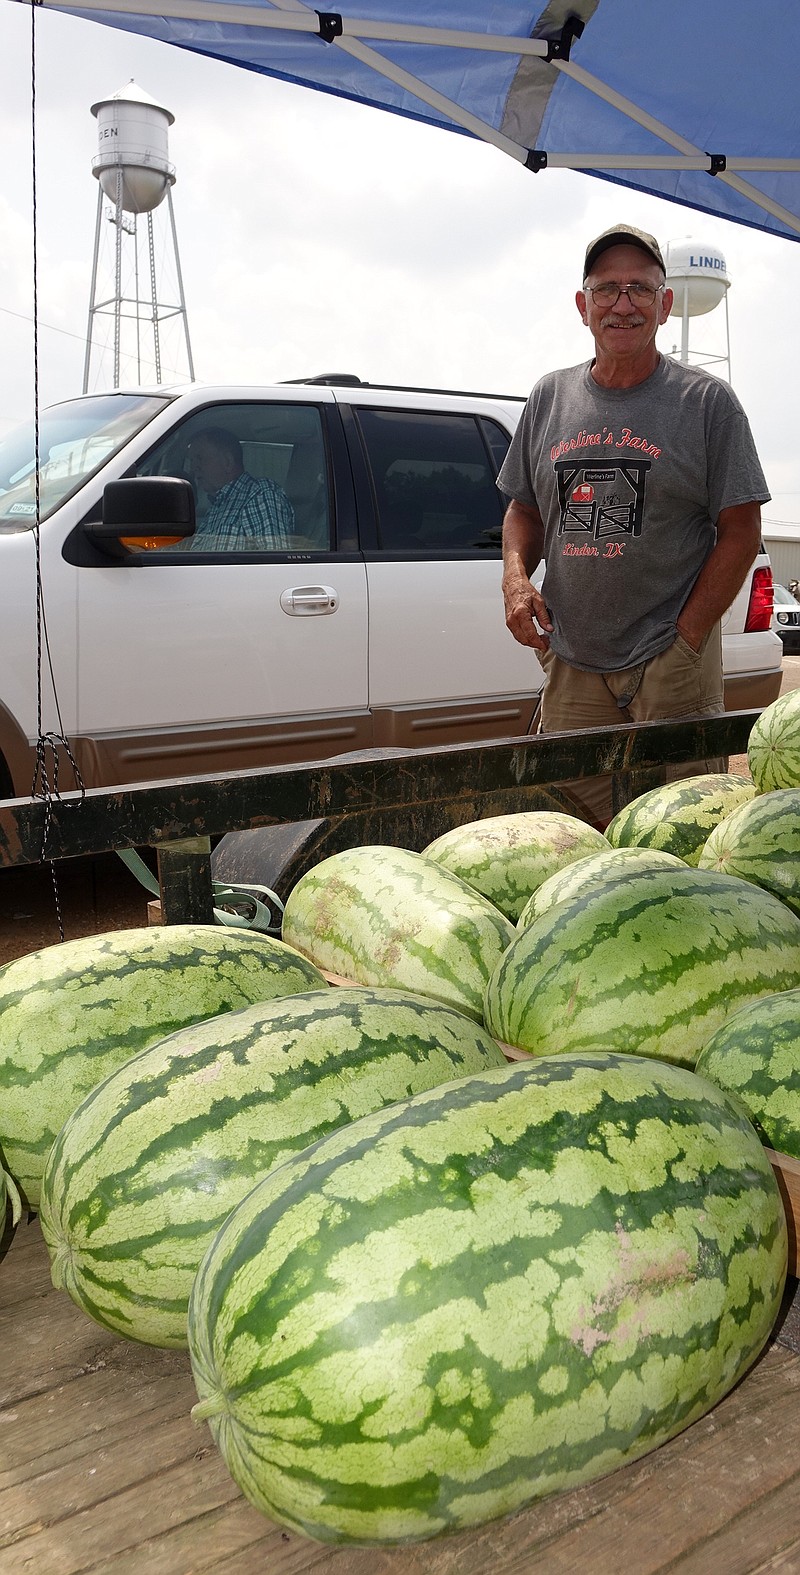 Ray Werline of Naples, Texas, is showing the local Jubilee cross watermelons he's been able to salvage from an unusual melon season. He is in Linden with its two water towers in the background, but he's usually at his hometown of Naples, where he often wins the watermelon contests held during the Naples Watermelon Festival.